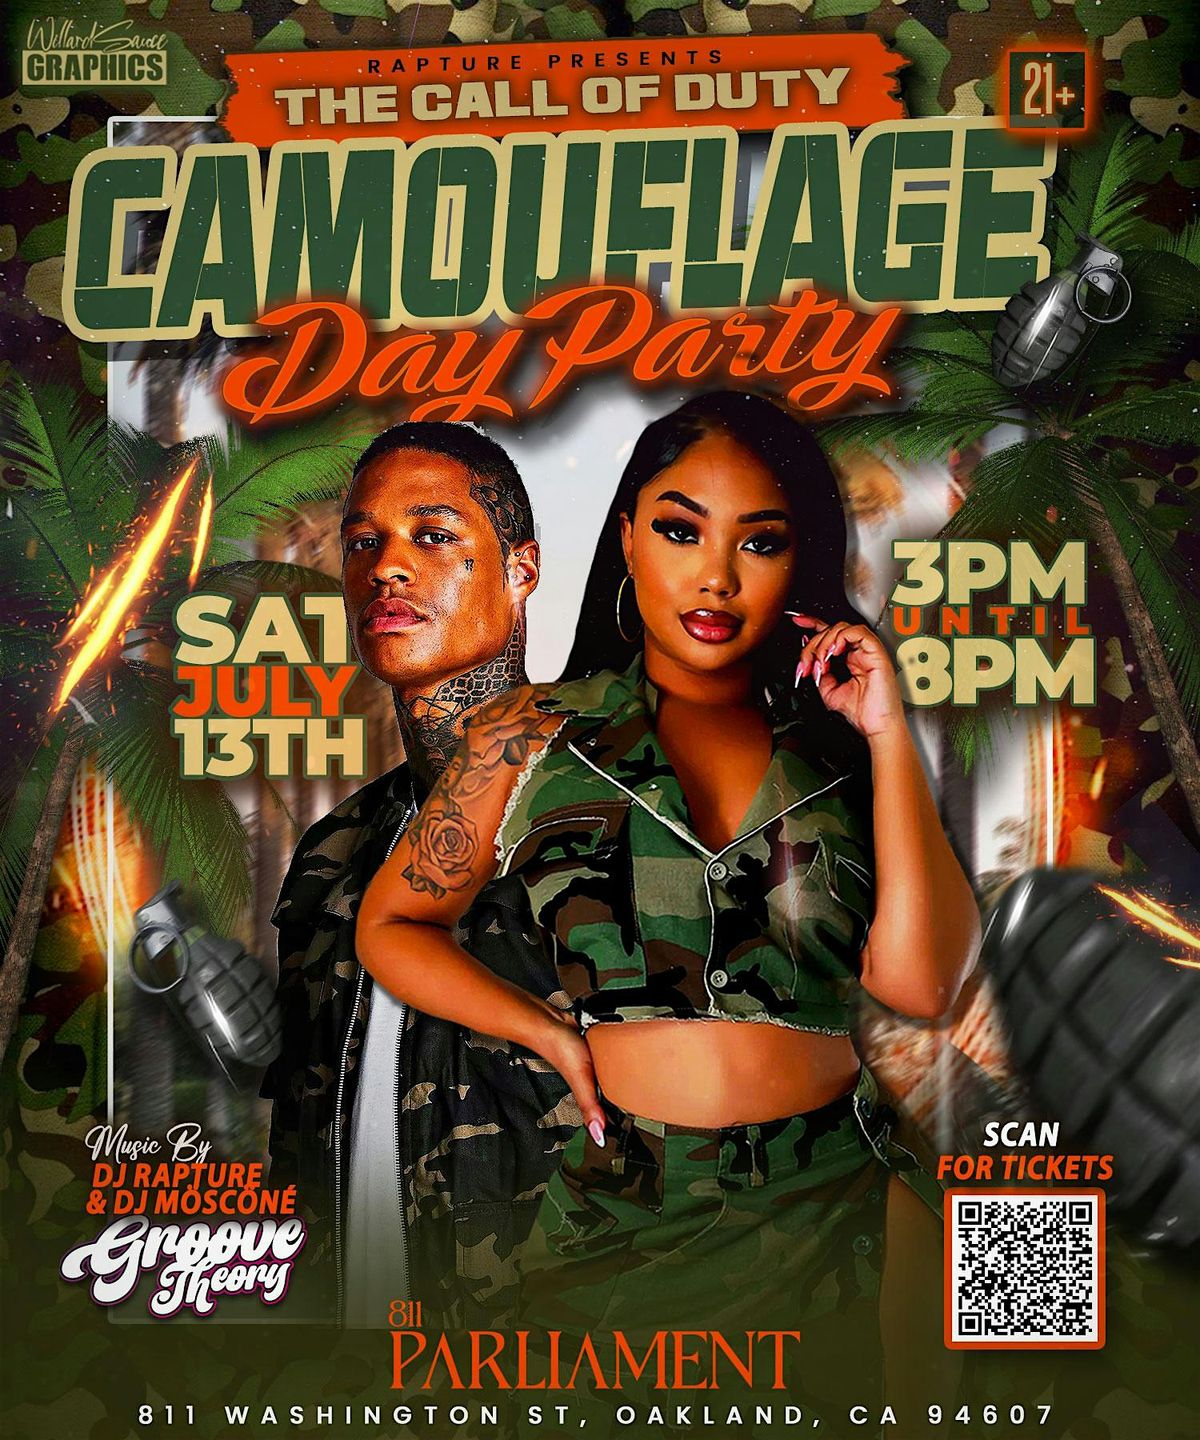 Groove Theory Bay Area  - The Call of Duty Camouflage Day Party